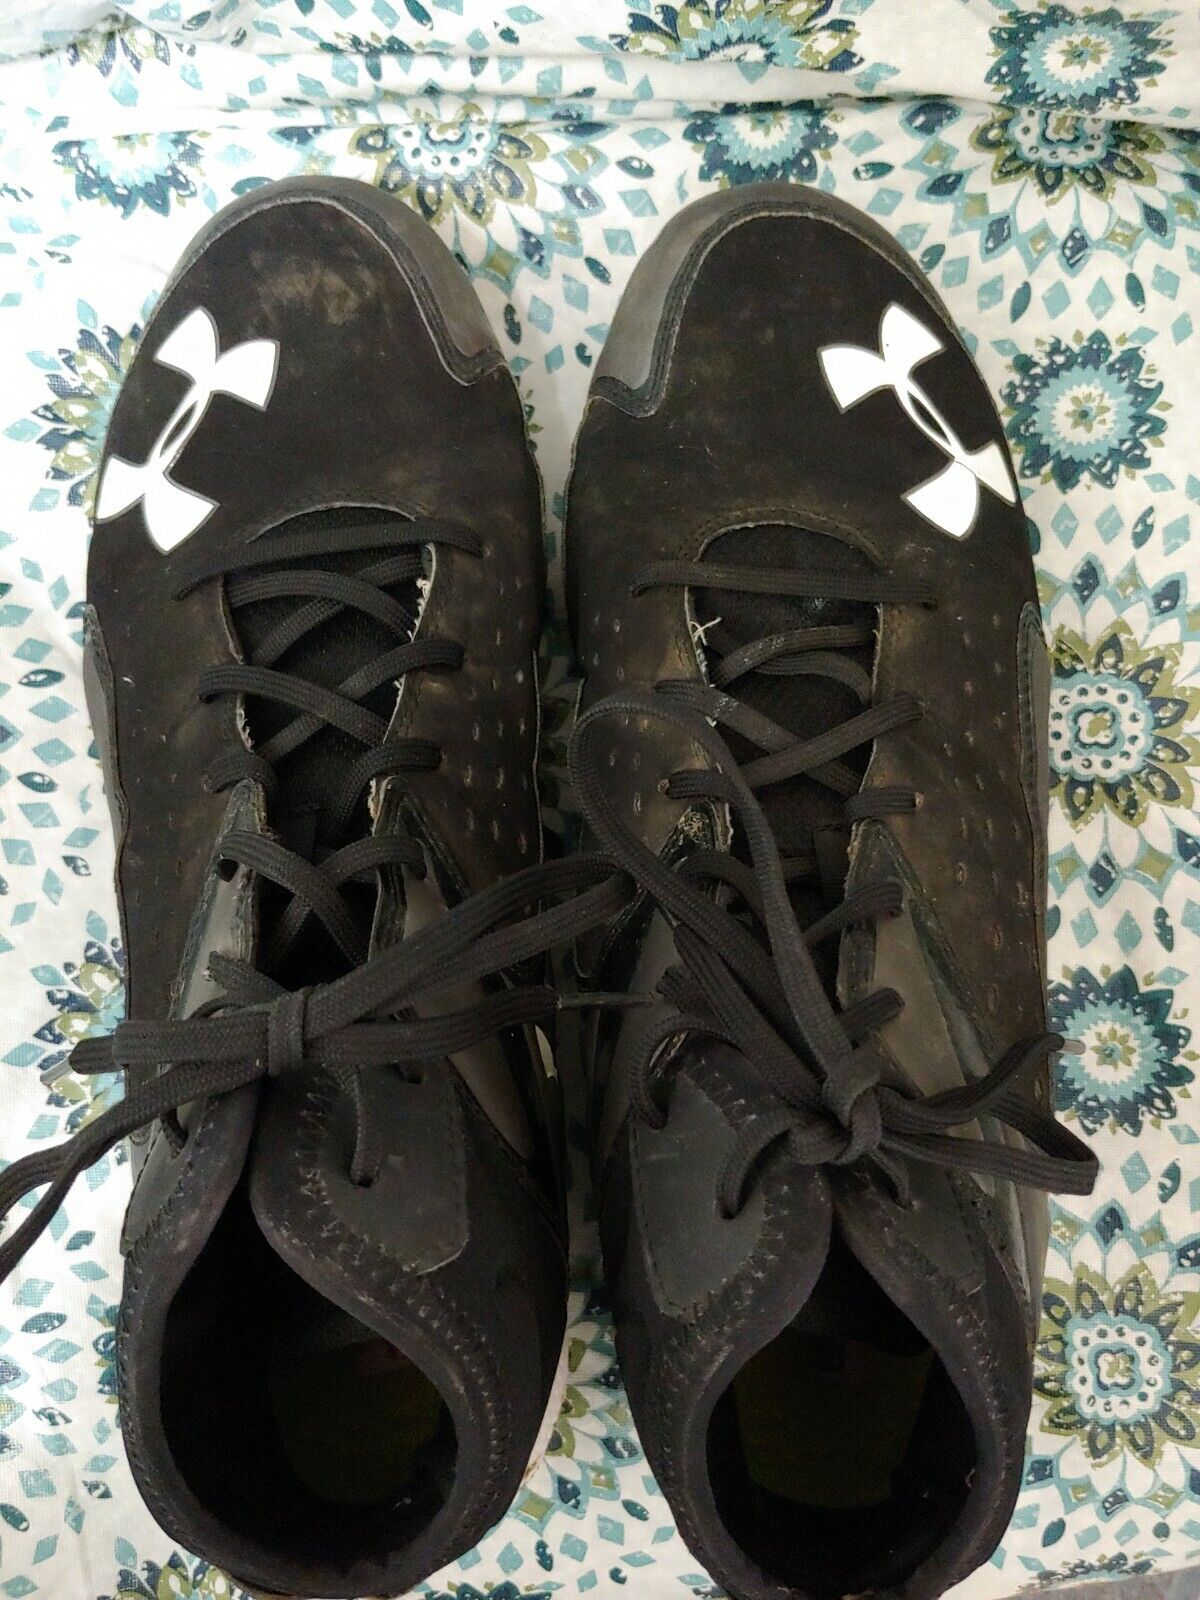 Under Armour Compfit Cleats Mens 13.5 Black White High Top eBay